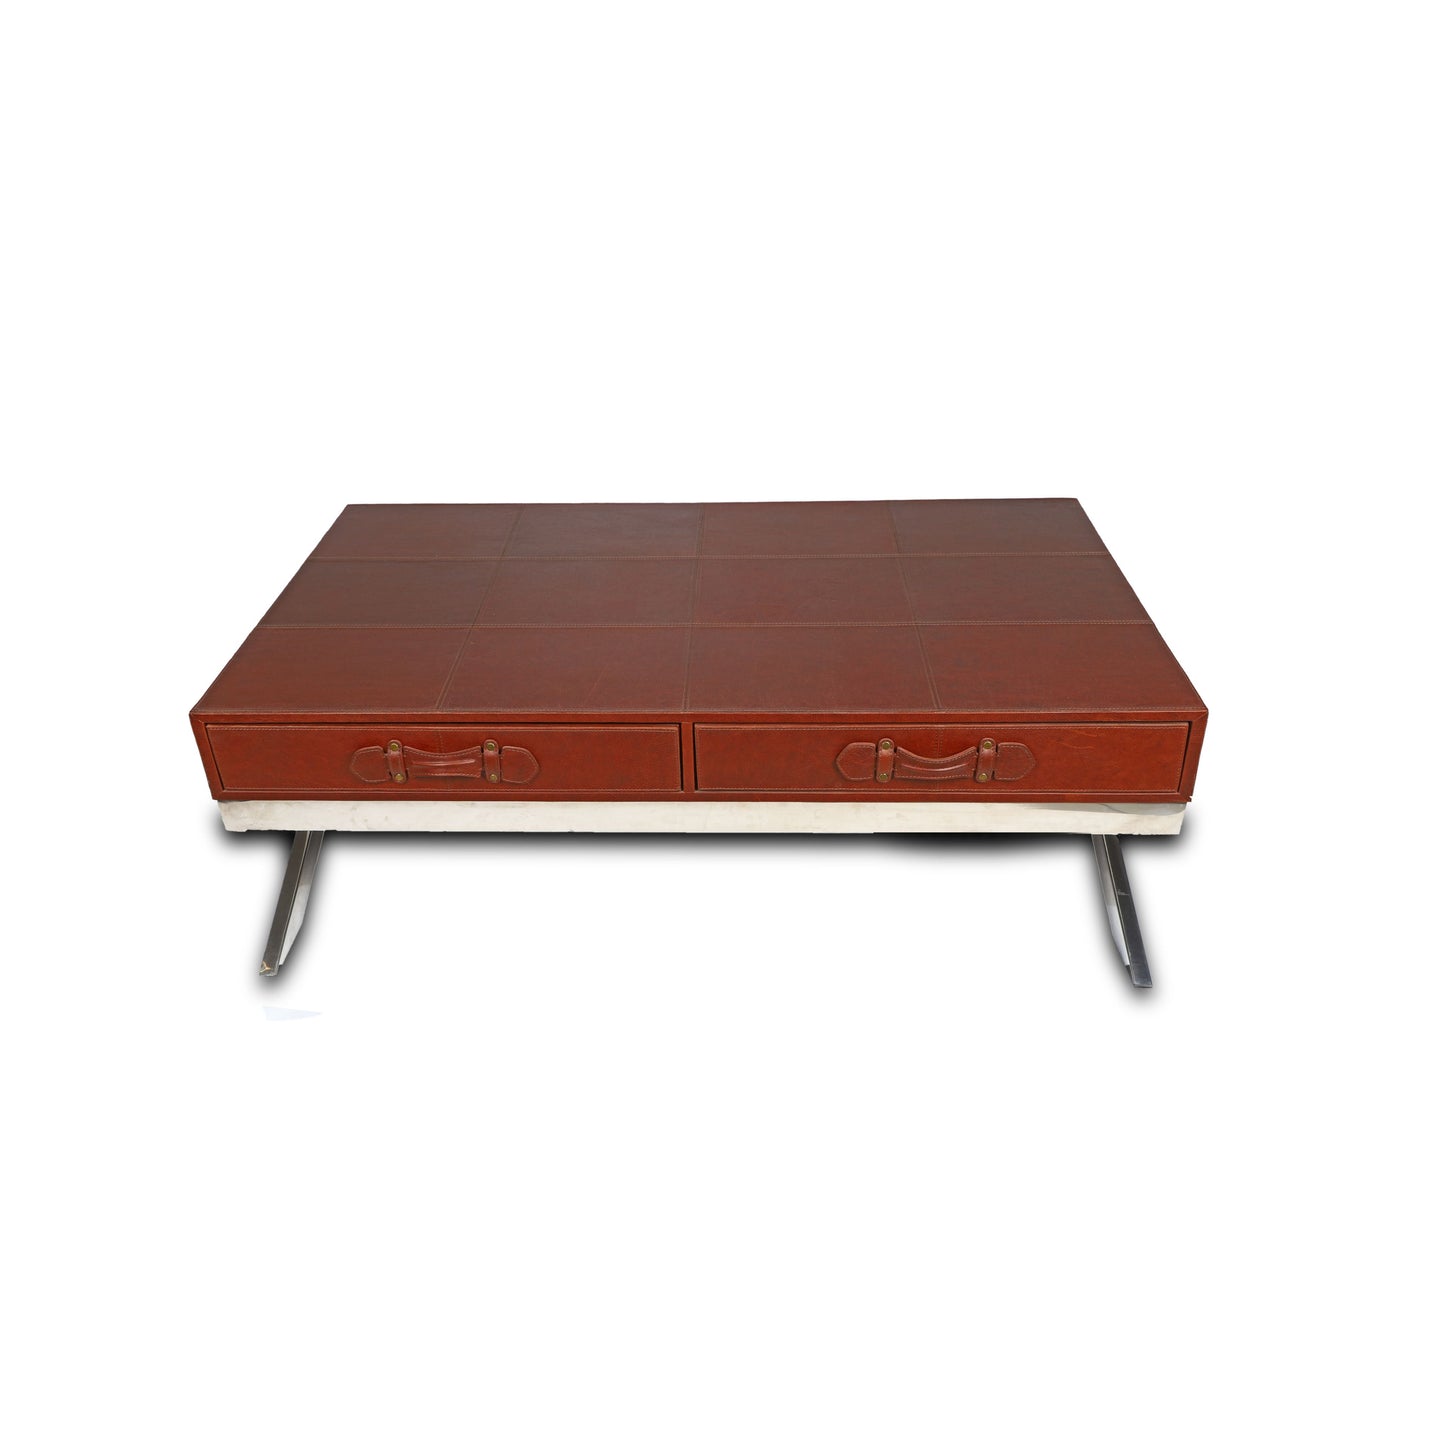 Genuine Leather Centre Table With Two Pull Out Drawers In Brown Colour